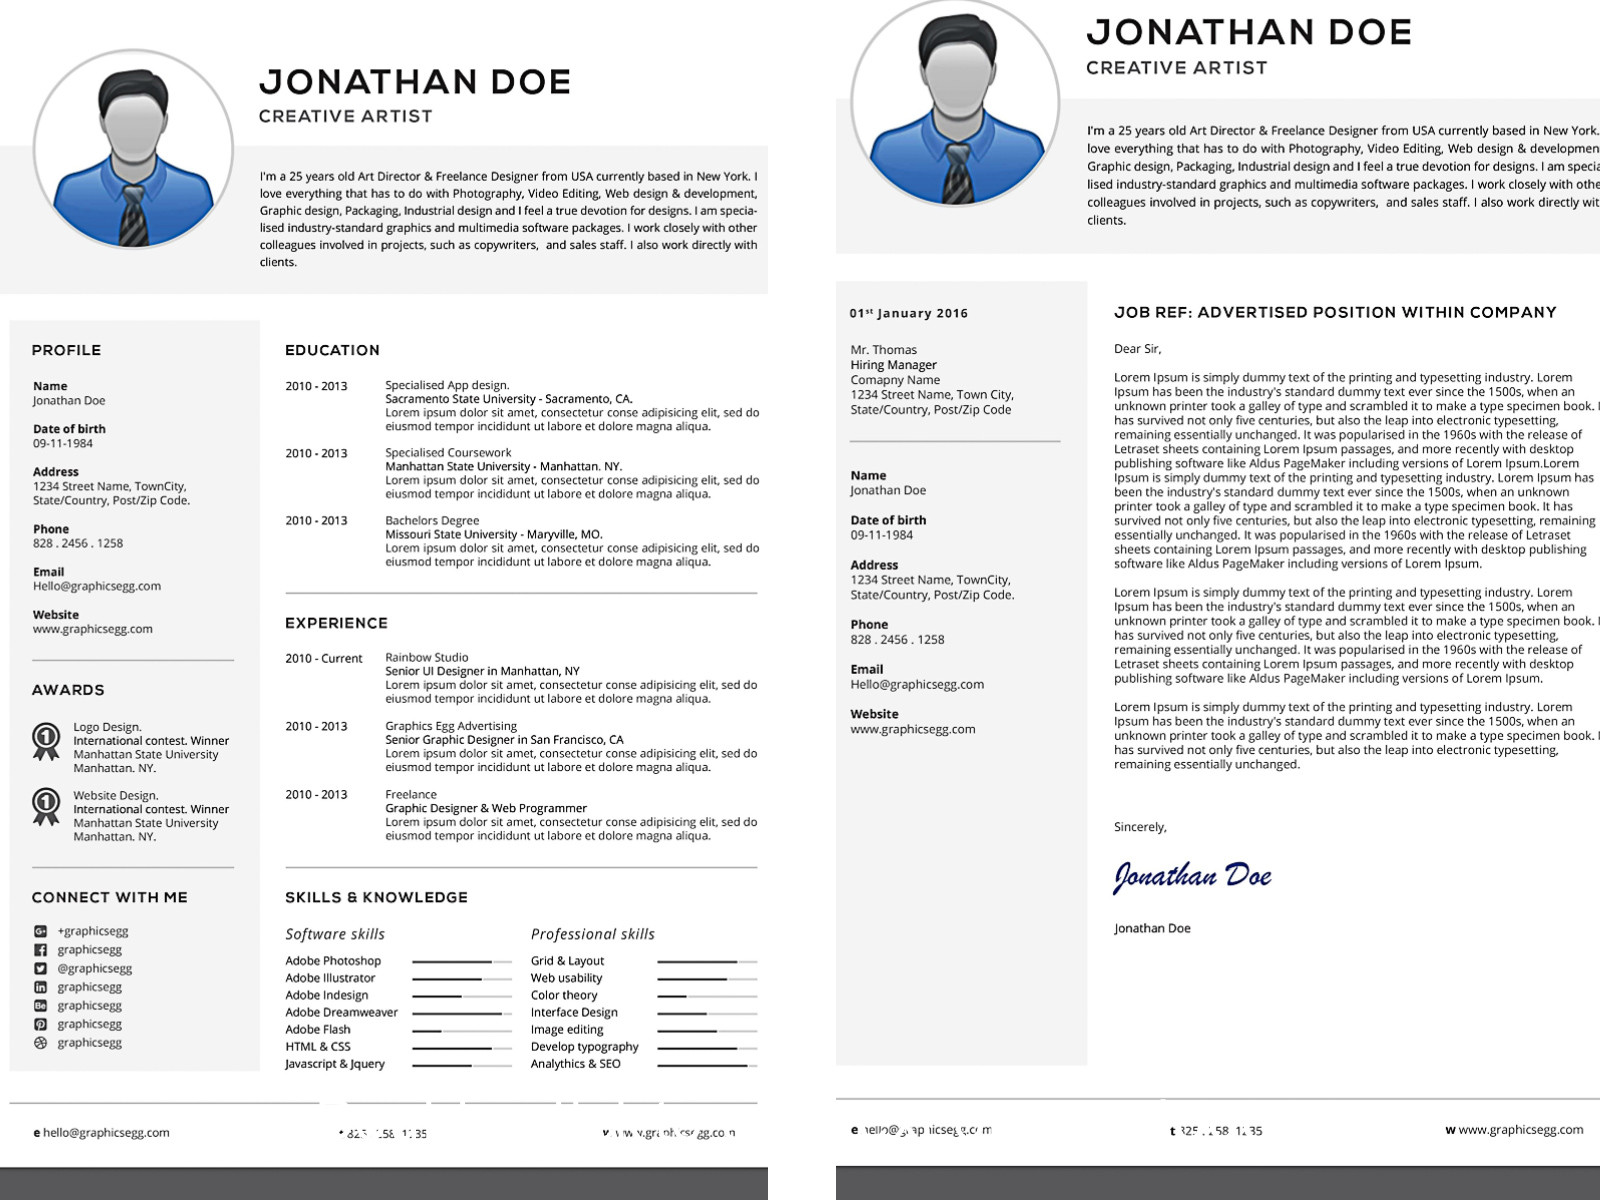 Resume and Cover Letter Template Free Download Professional Resume with Cover Letter Set Free Download